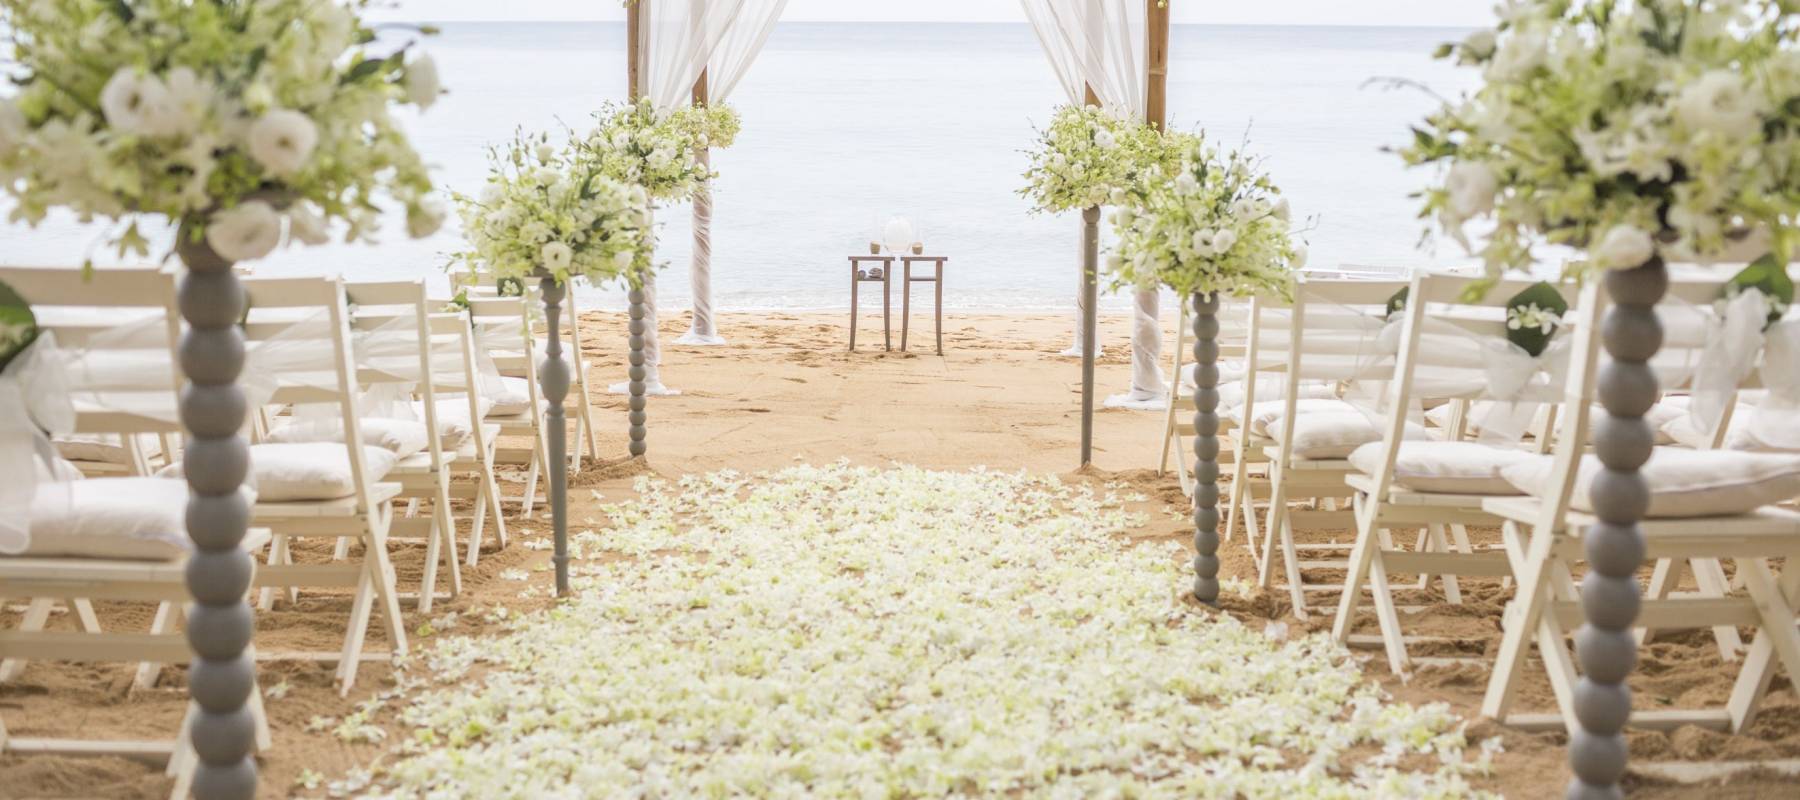 Affordable Spots For The Dreamiest Destination Wedding Ever